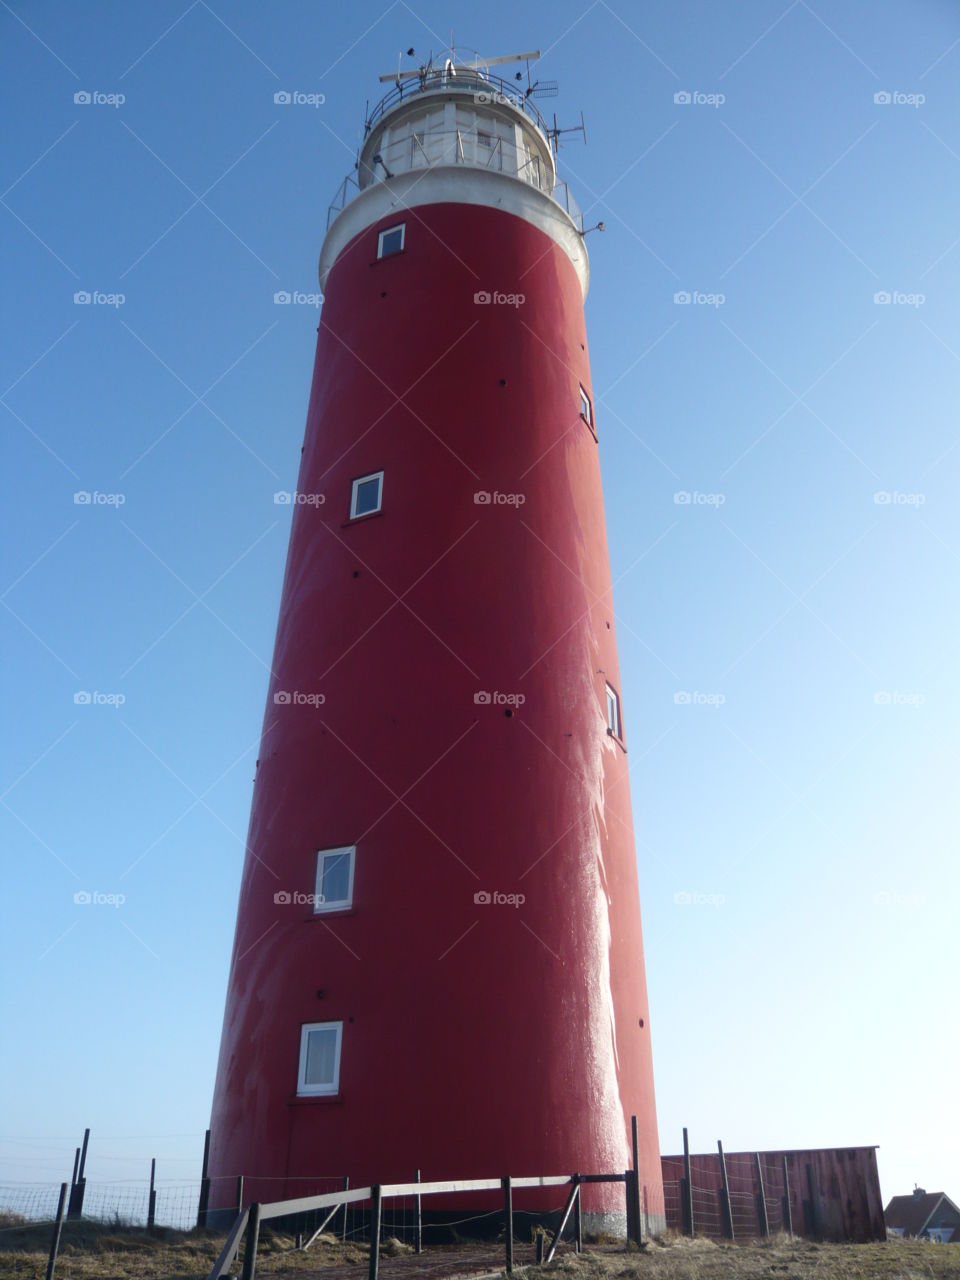 No Person, Lighthouse, Architecture, Sky, Travel